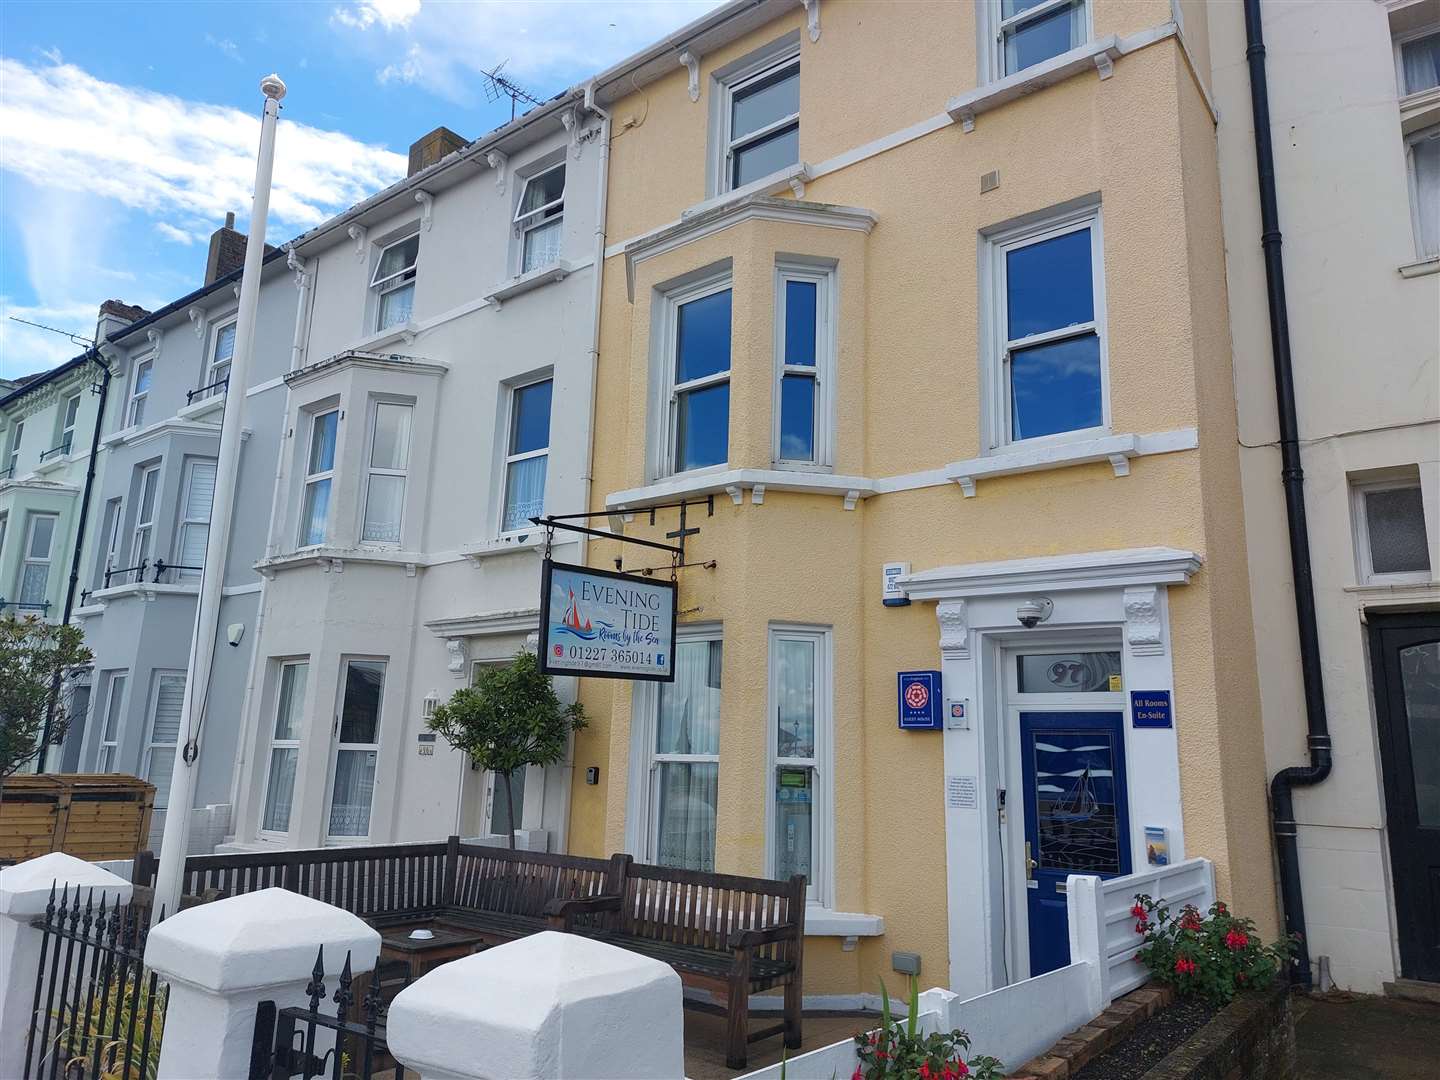 Evening Tide guest house in Central Parade, Herne Bay